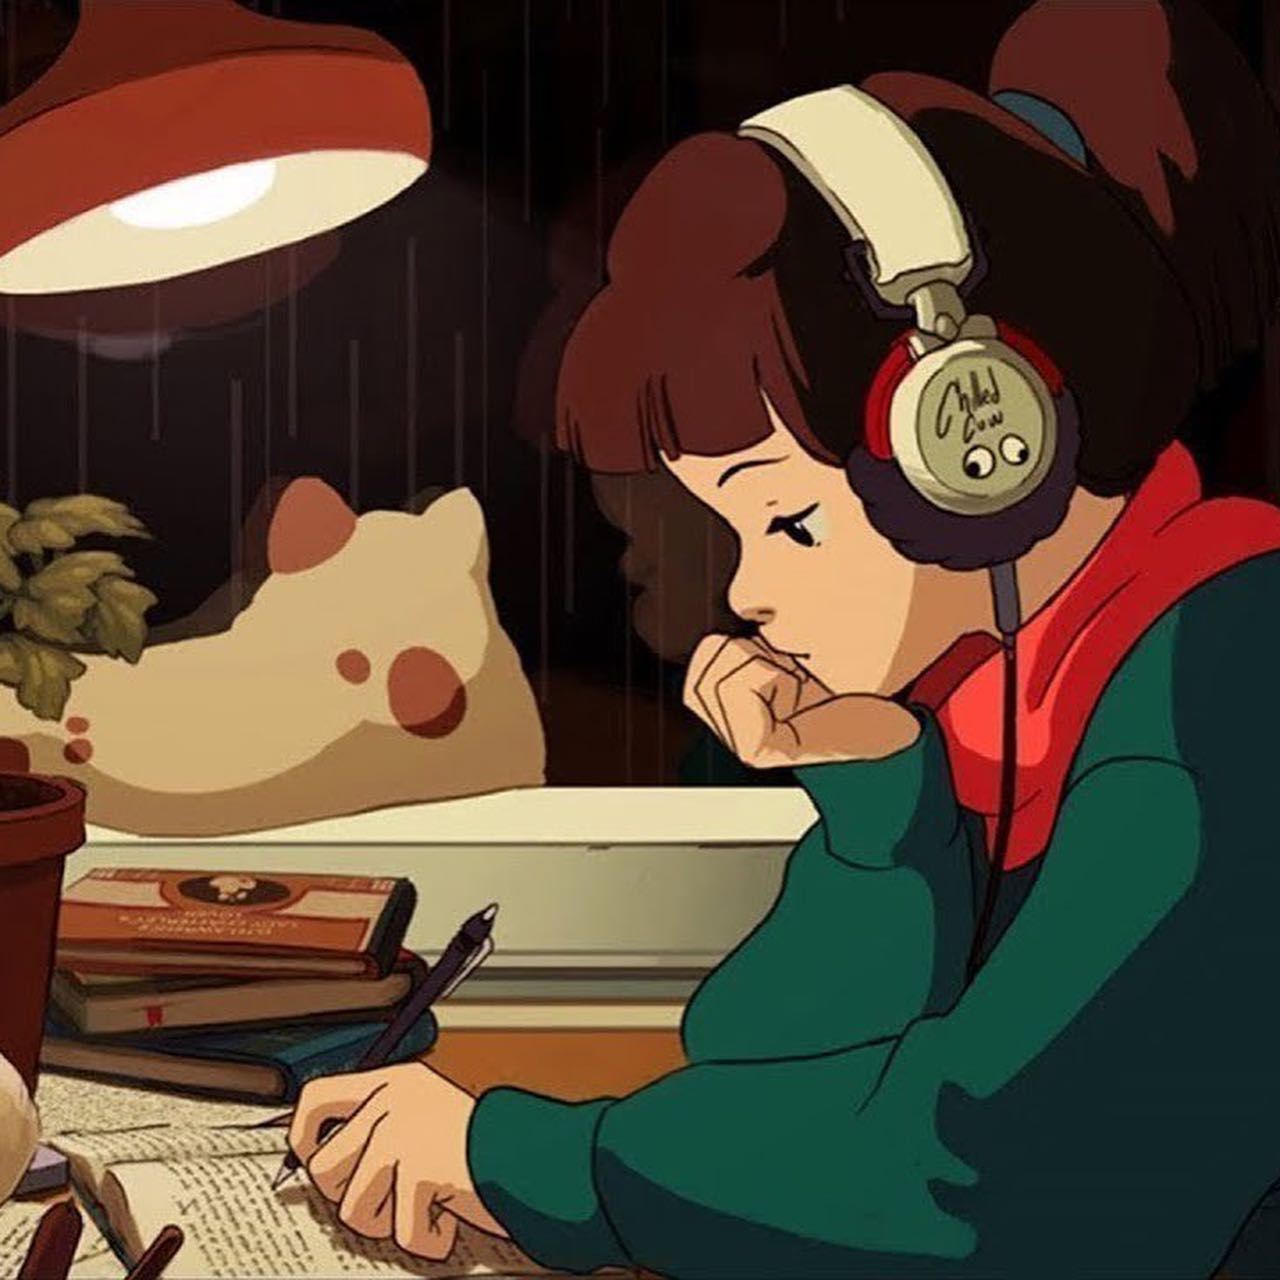 Wake up babe, Lo fi girl is trending bc new lore just dropped🧍🏾‍♀️
•
{SWIPE} OMG y’all they’re giving us STORY, MYSTERY, come on PLOT! 😂 
People have been confused with the new lofi beats mascot(synthwave boy) & wondering where lofi girl went! (Or if she just  graduated finally bc they had home girl studying for YEARS omg) but turns out there’s more to it than we know & as a LoreWhore™️🫡 that little video reveal(4th slide!) made me so happy🥹
•
Had me itching to revisit one of my fave cosplays “lofi Girl” lmfao maybe I should try to do synthwave boy too?🧐🤓
•
What do you listen to while working?👀🎶📚
•
•
•
•
•
•
•
•
•
#lofigirl #lofihiphop #lofibeats #chilledcow #cosplay #cosplayer #cosplaying #cosplays #cosplayvideo #chinith0t #synthwaveboy #anime #explore #casualcosplay #trending #viral #youtube